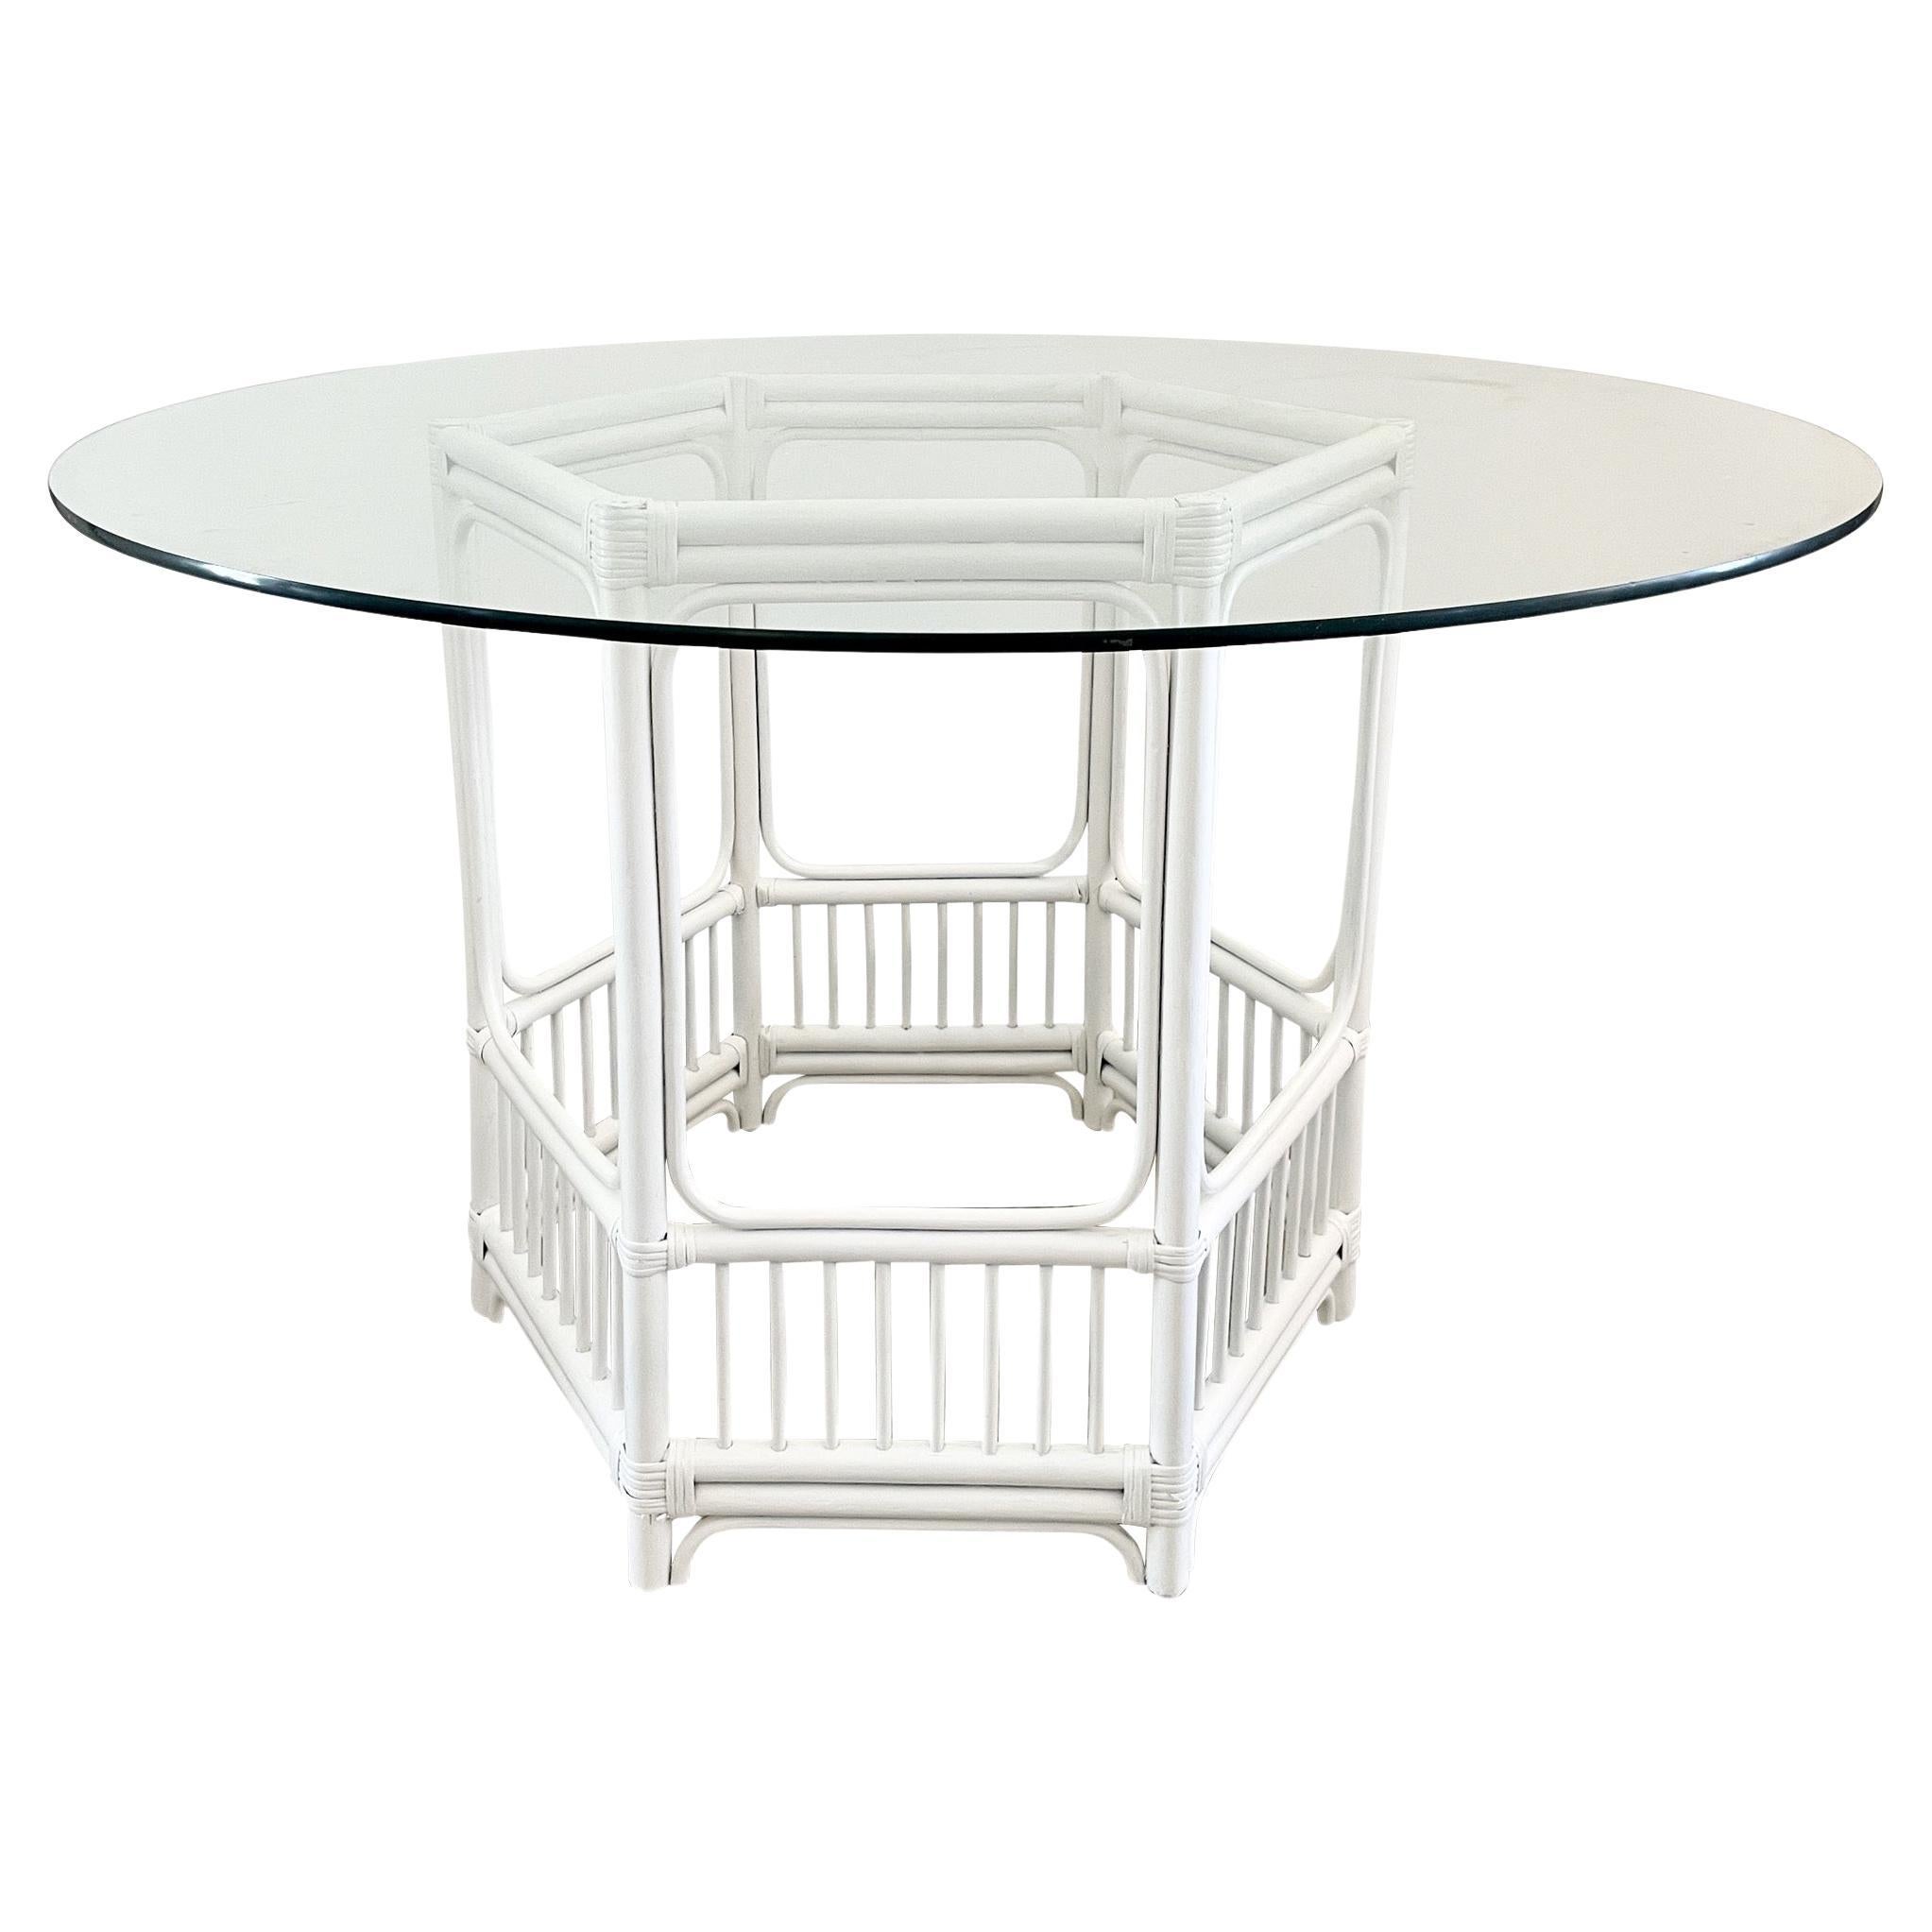 Ficks Reed Rattan Dining Table Base with Glass Top